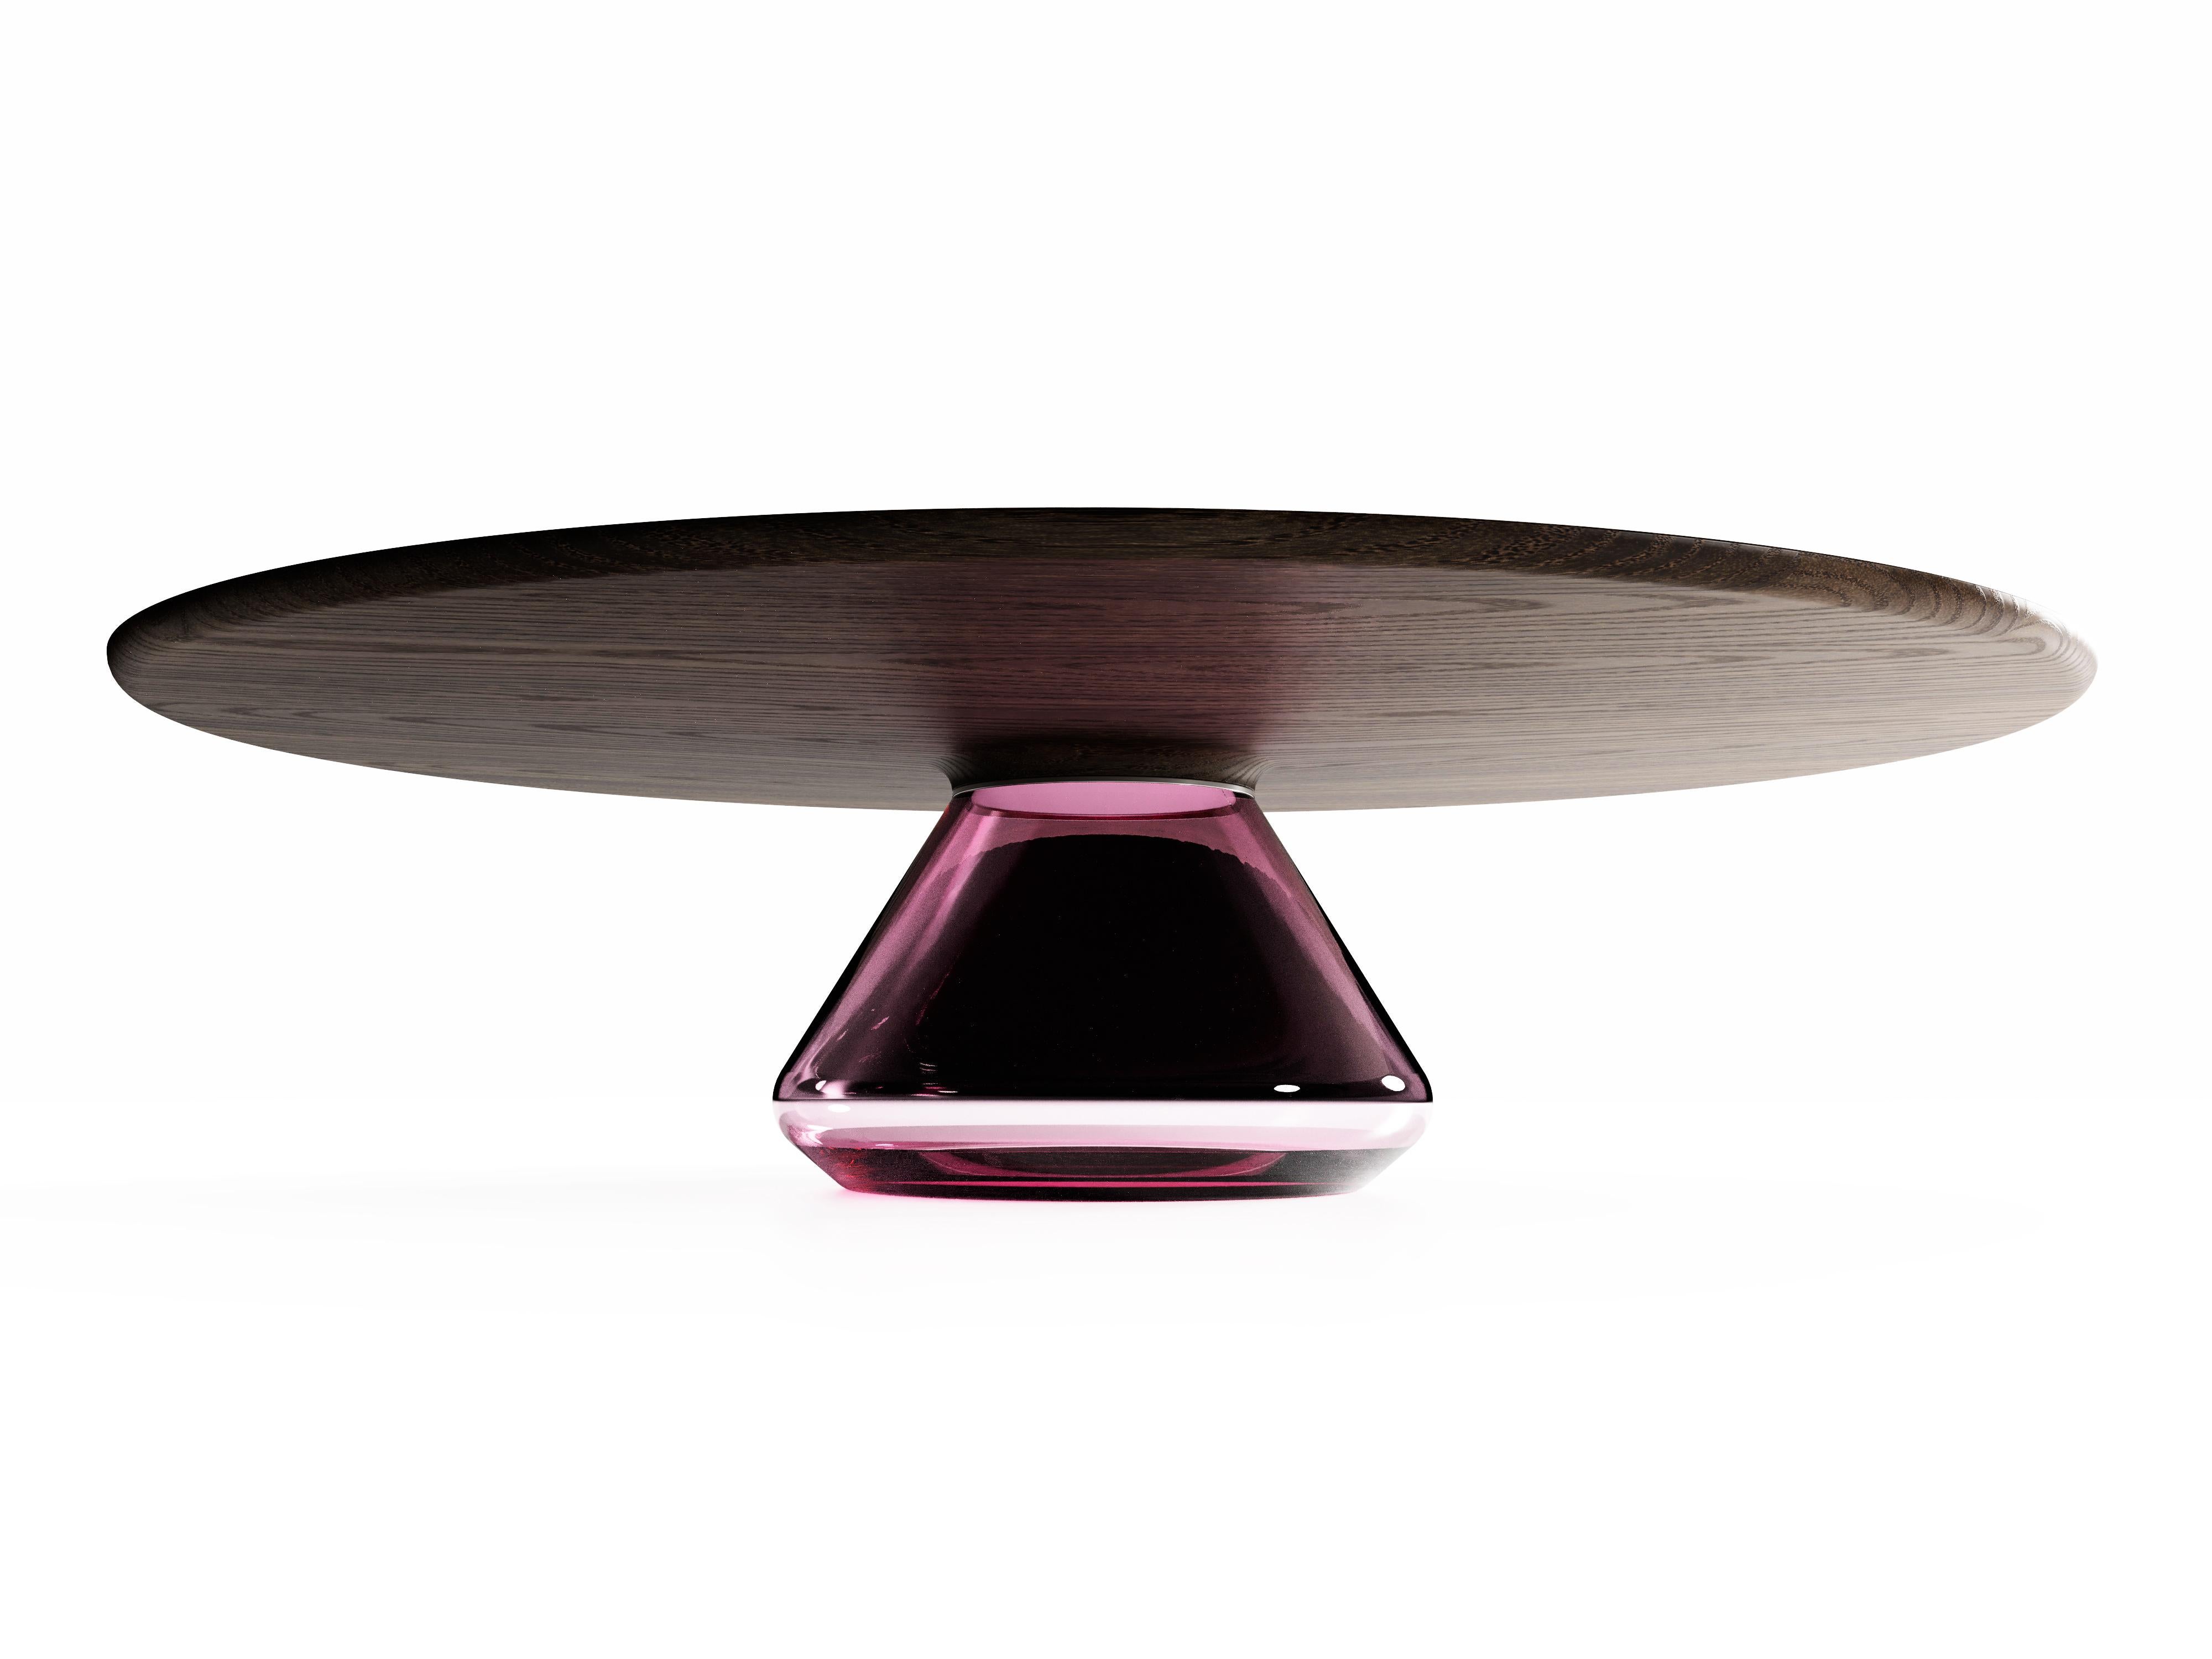 British The Pink Lady Eclipse I, Limited Edition Coffee Table by Grzegorz Majka